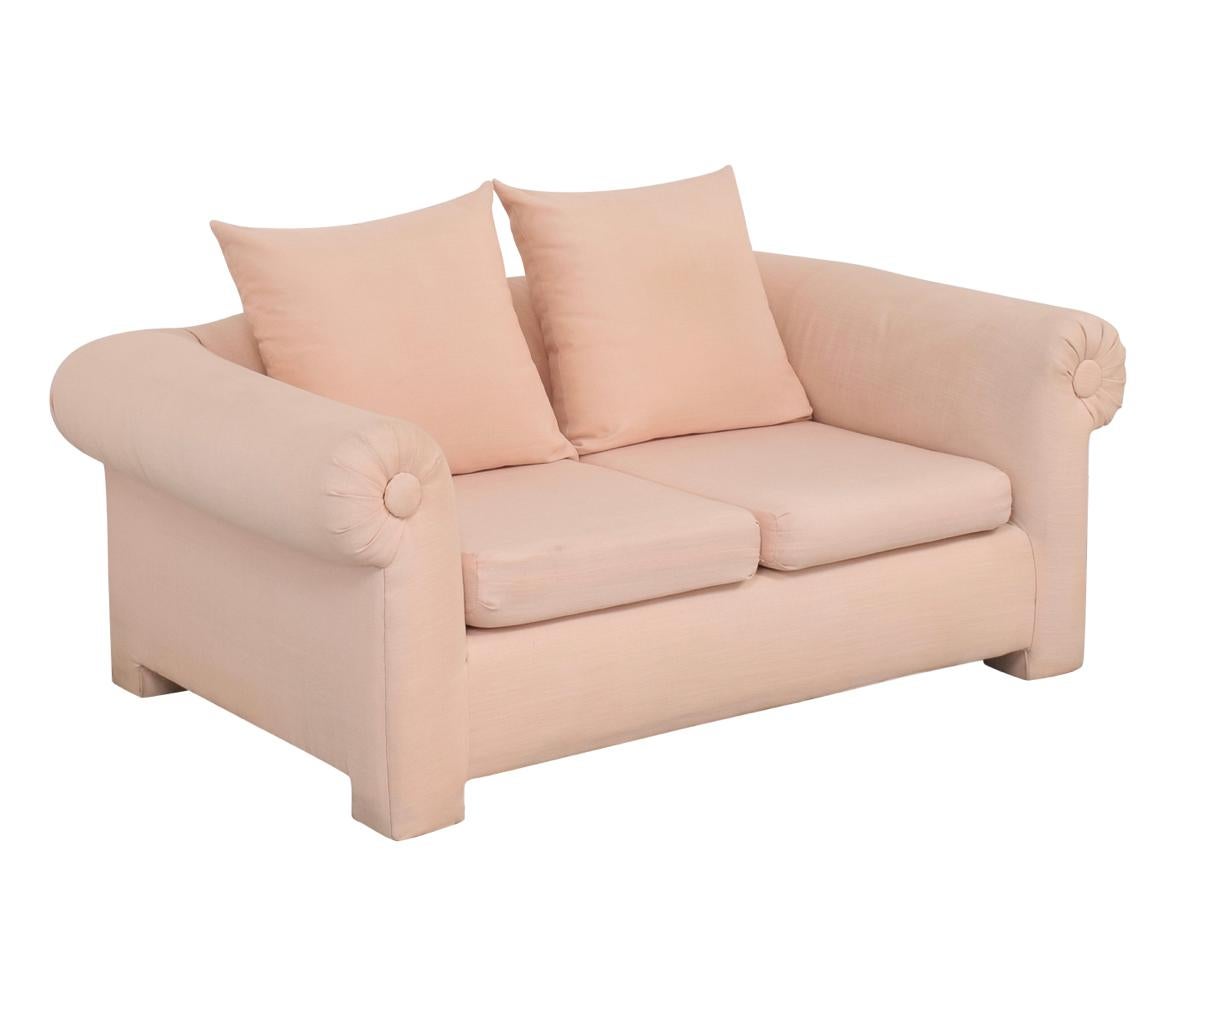 Vintage Kreiss collection pink bubble loveseat, California cool modern sofa.

Measures: 65